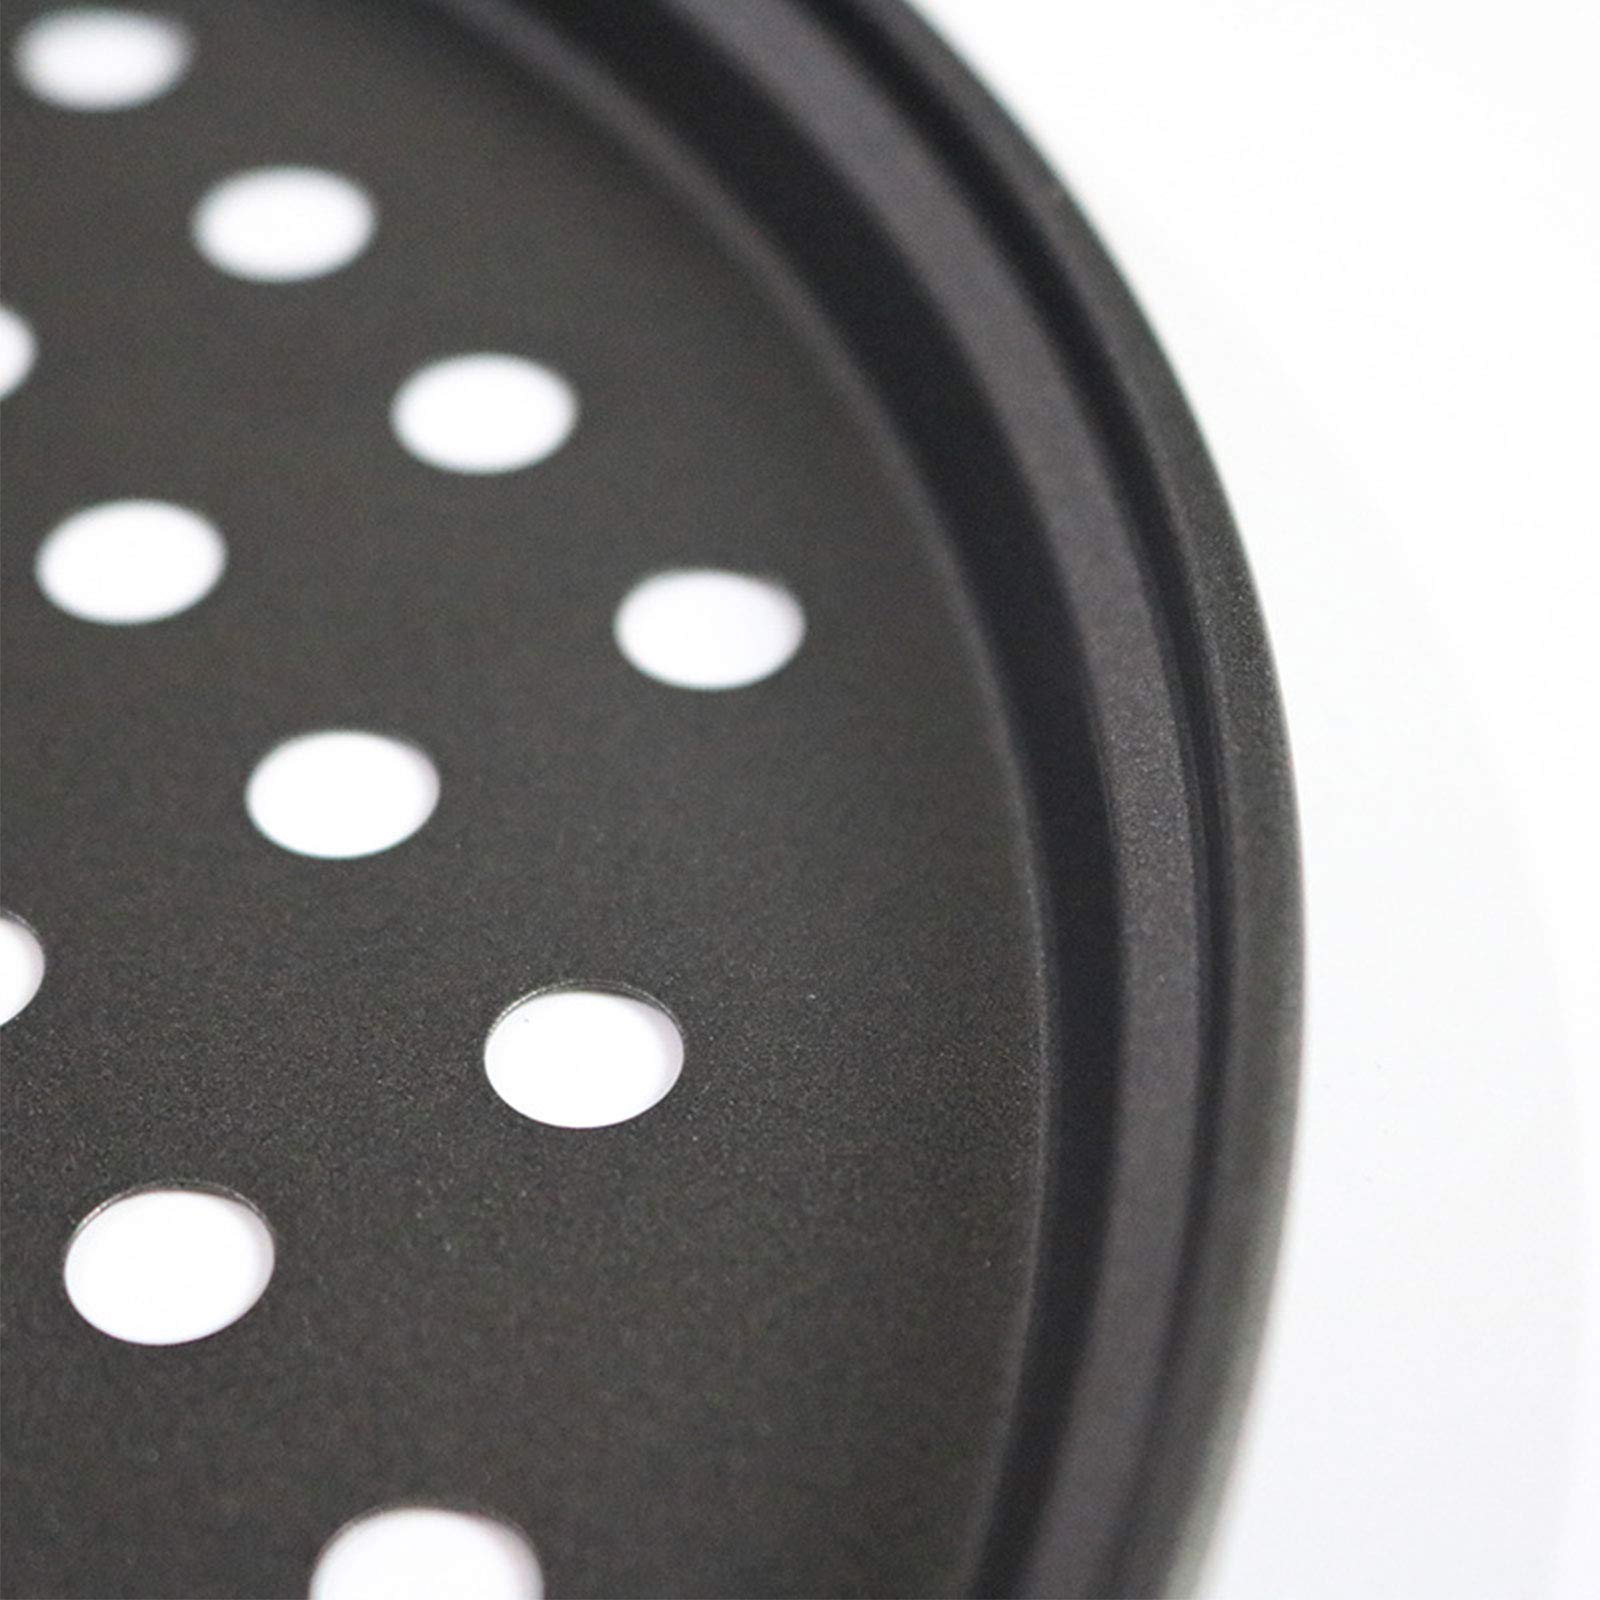 Pizza Pan for Oven, 12 inch Nonstick Pizza Pans, Carbon Steel Pizza Pan with Holes, Pizza Baking Pan for Oven Baking Supplies, for Home Baking Kitchen Oven Restaurant